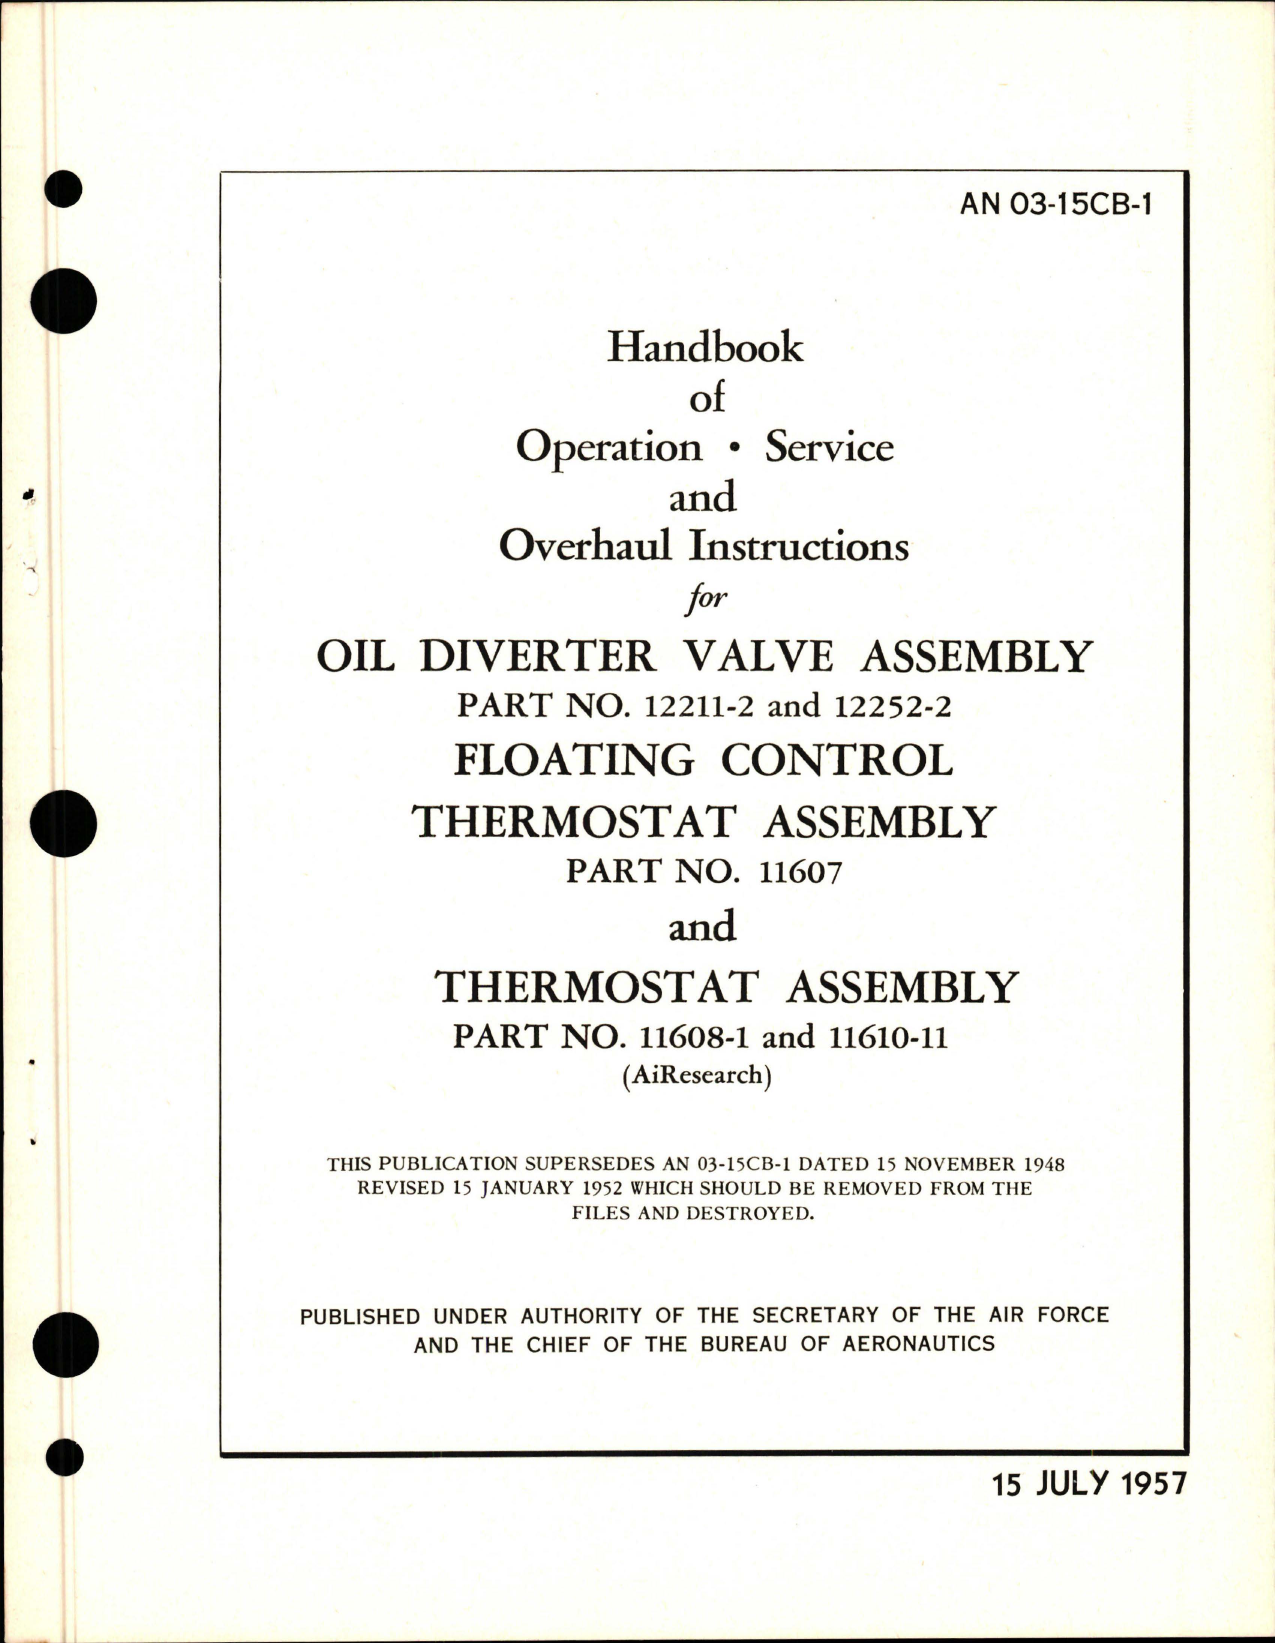 Sample page 1 from AirCorps Library document: Operation, Service, Overhaul Instructions for Oil Diverter Valve Assembly - Part 12211-2, 12252-2, Floating Control Thermostat Assembly - Part 11607, Thermostat Assembly - Parts 11608-1, 11610-11